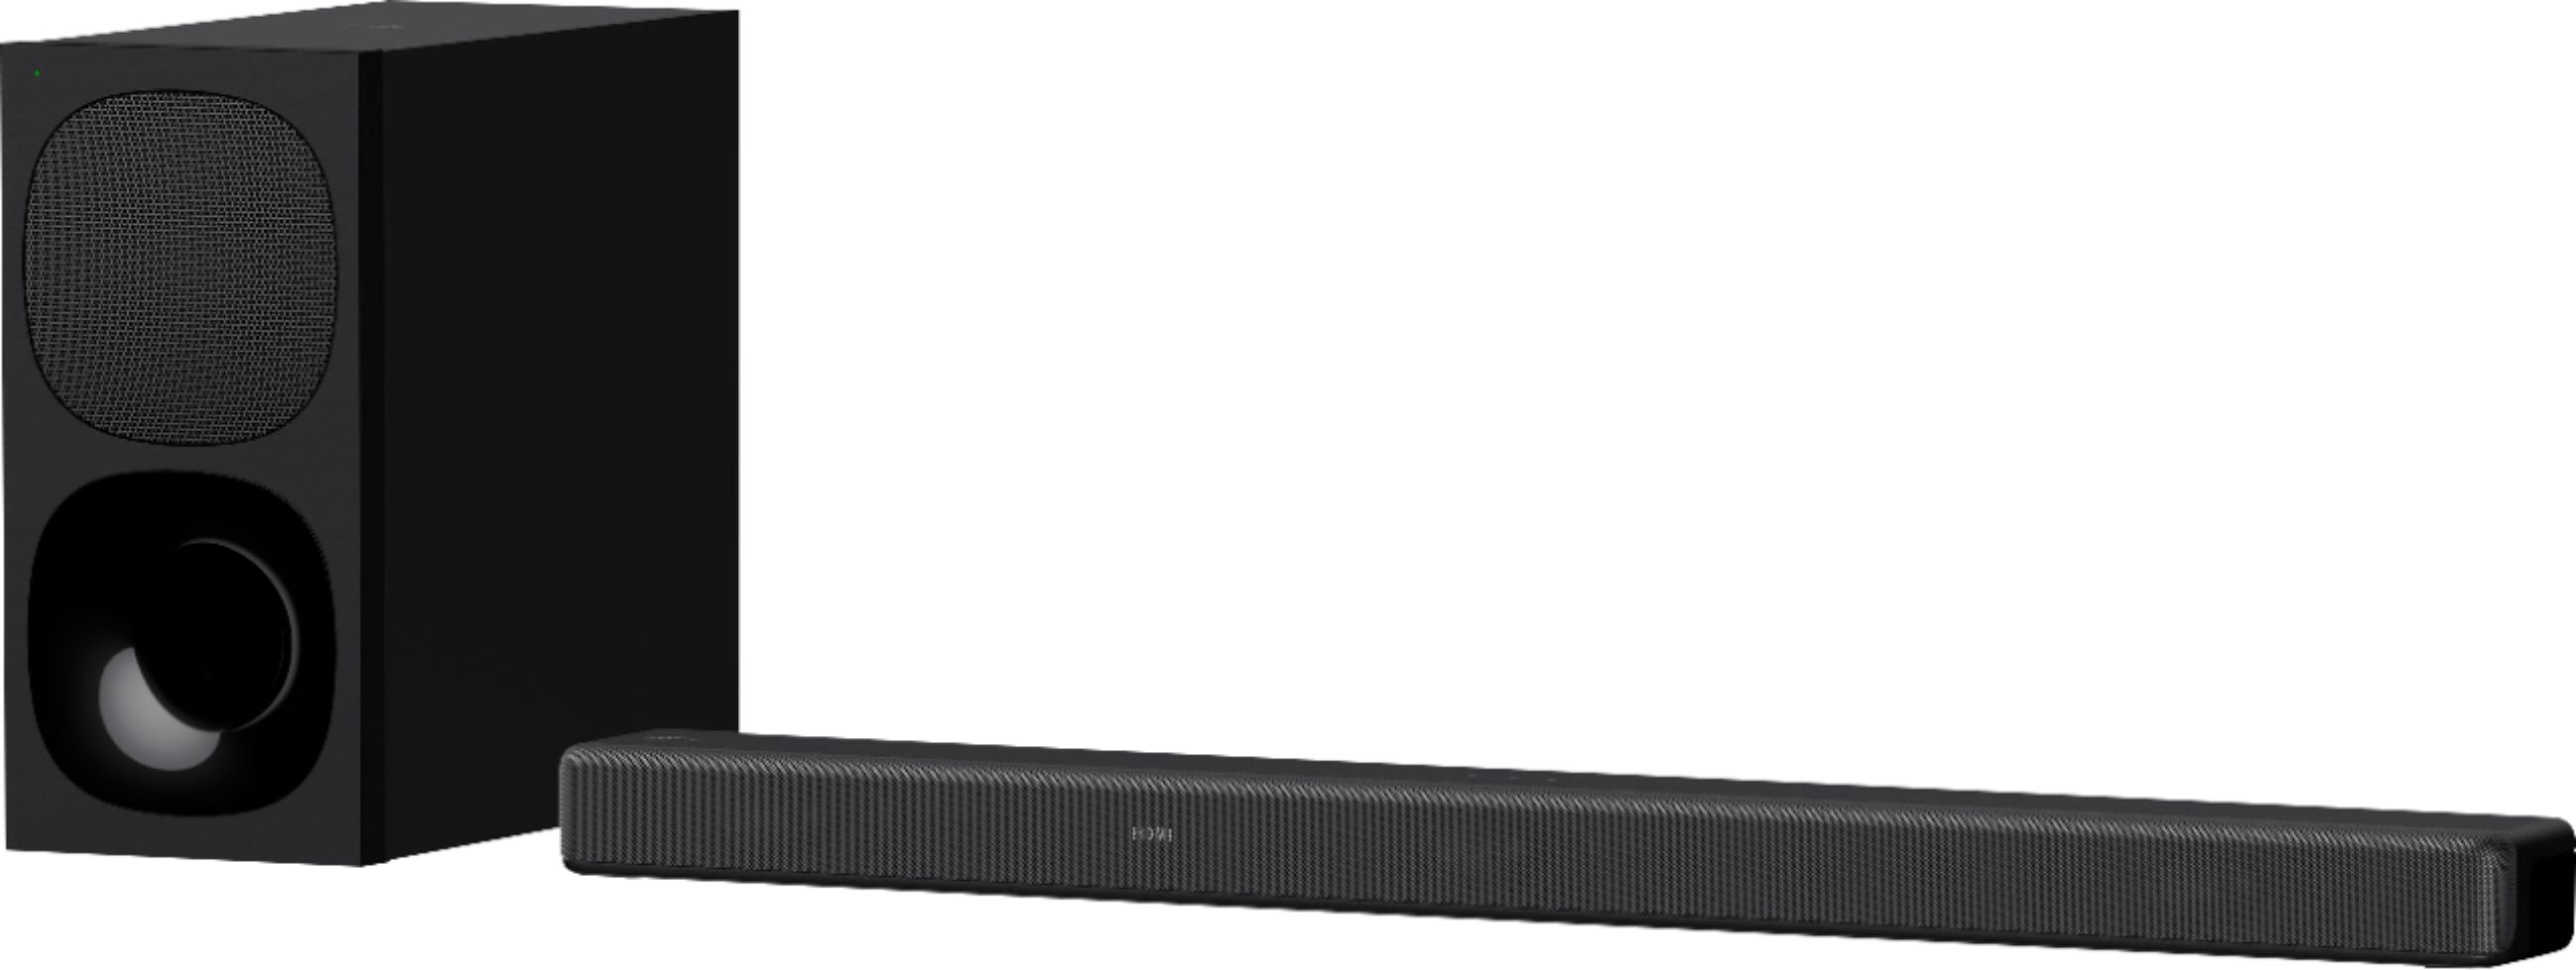 Best Buy: Sony HT-G700 3.1 Wireless Black Dolby Atmos/DTS:X Soundbar Channel Subwoofer with HTG700 and